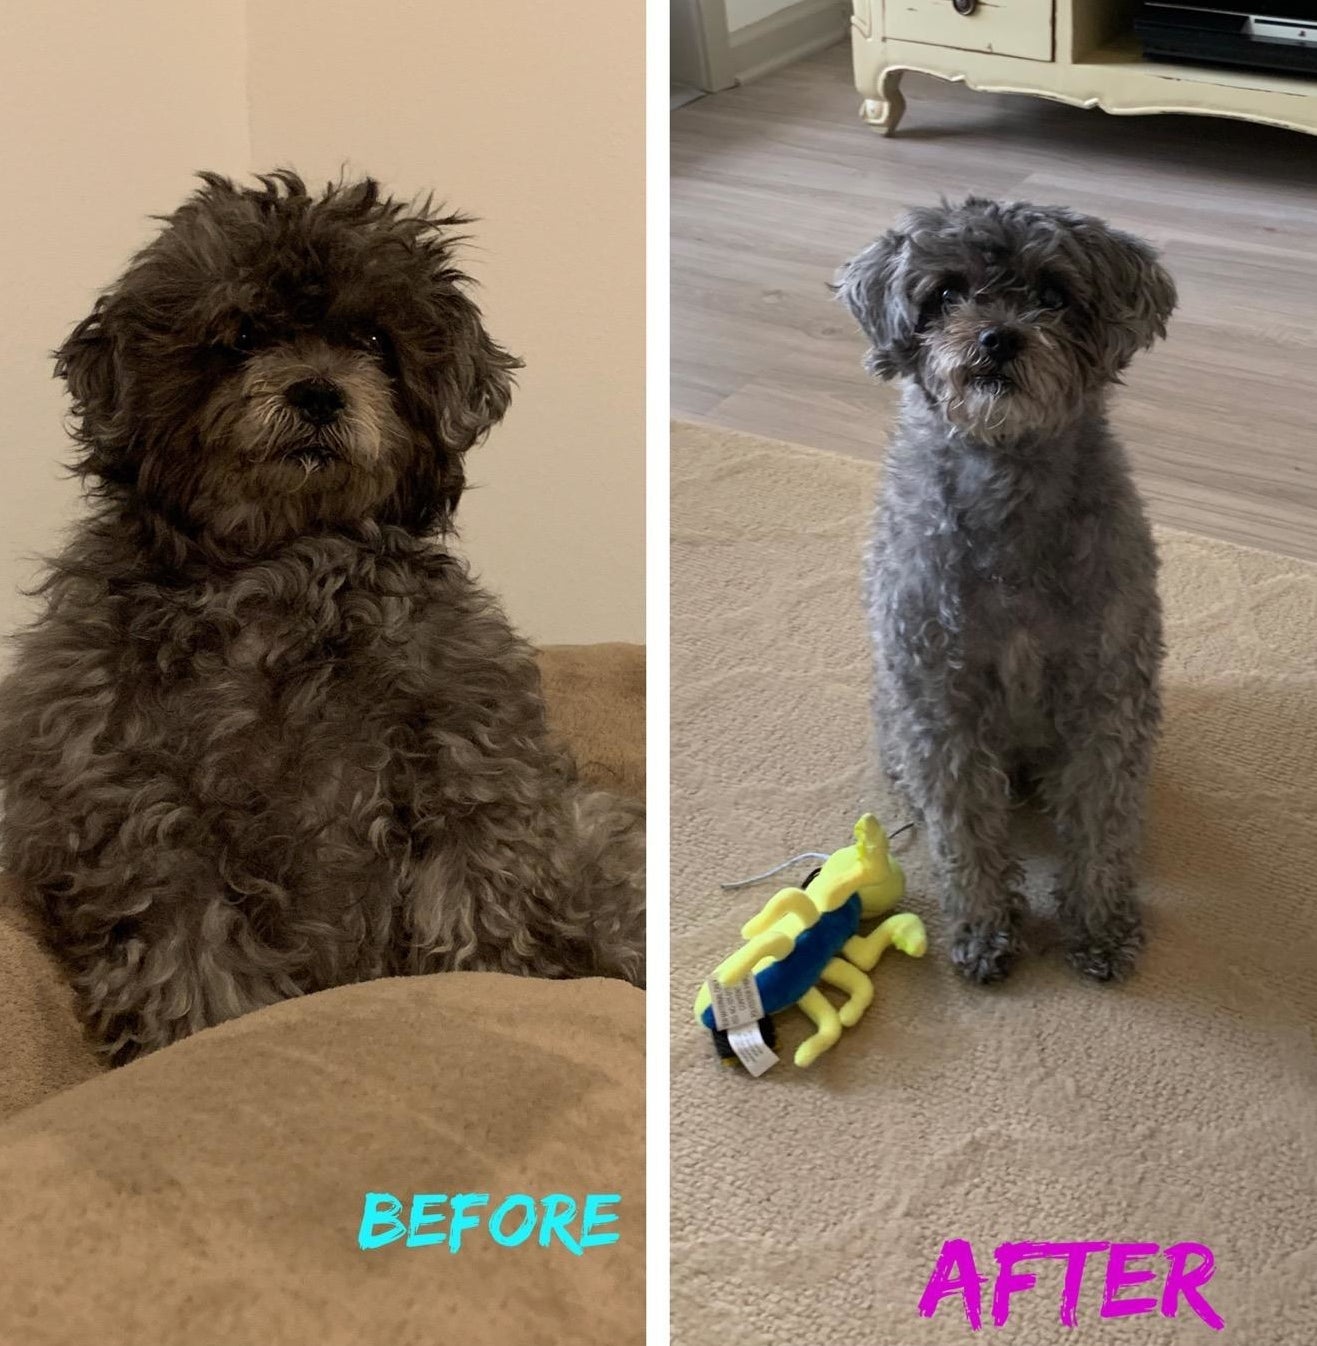 A dog before and after being sheared